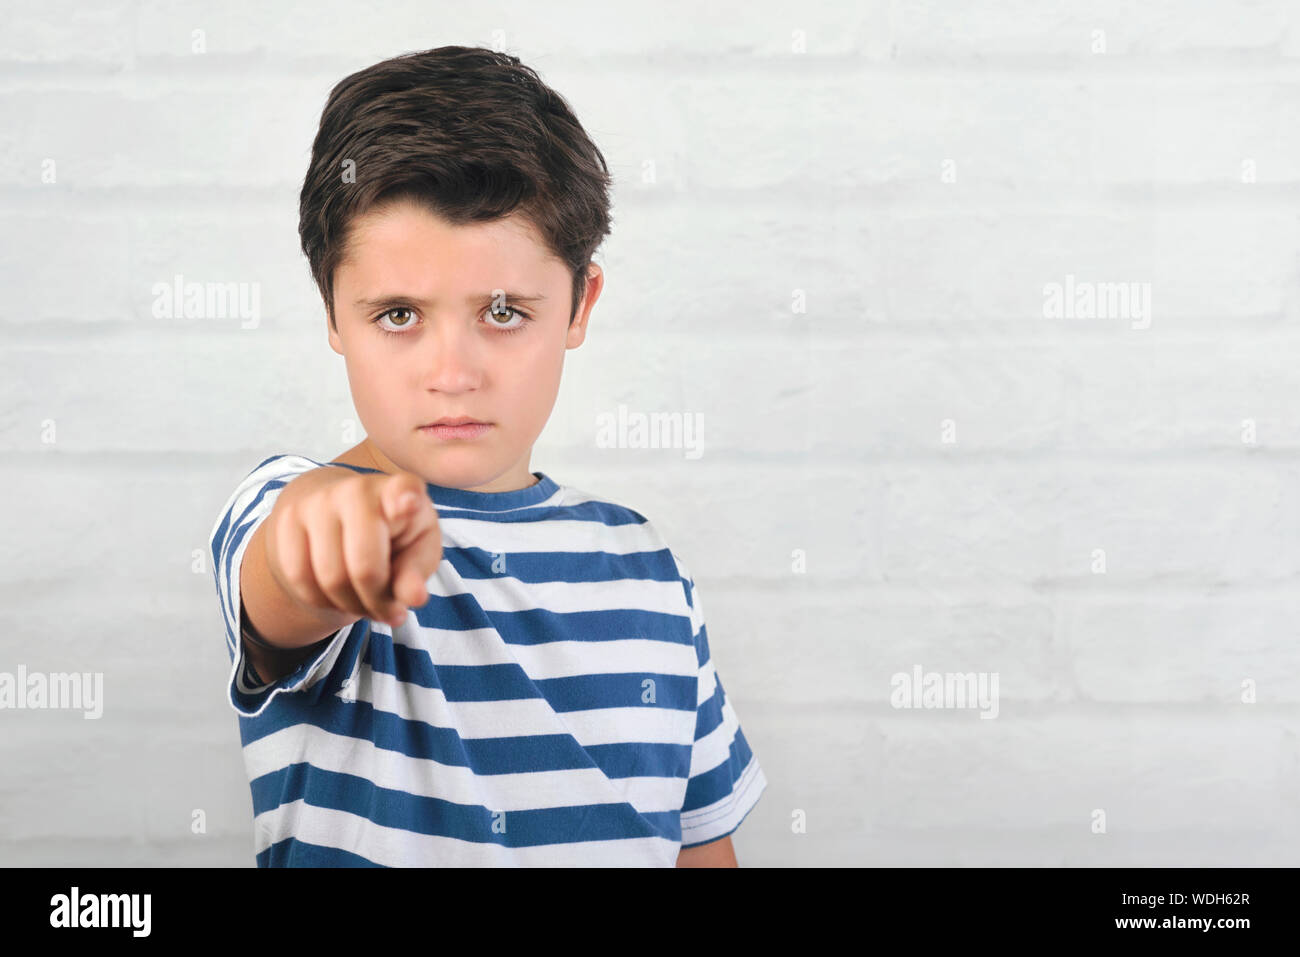 angry child pointing front on brick background Stock Photo